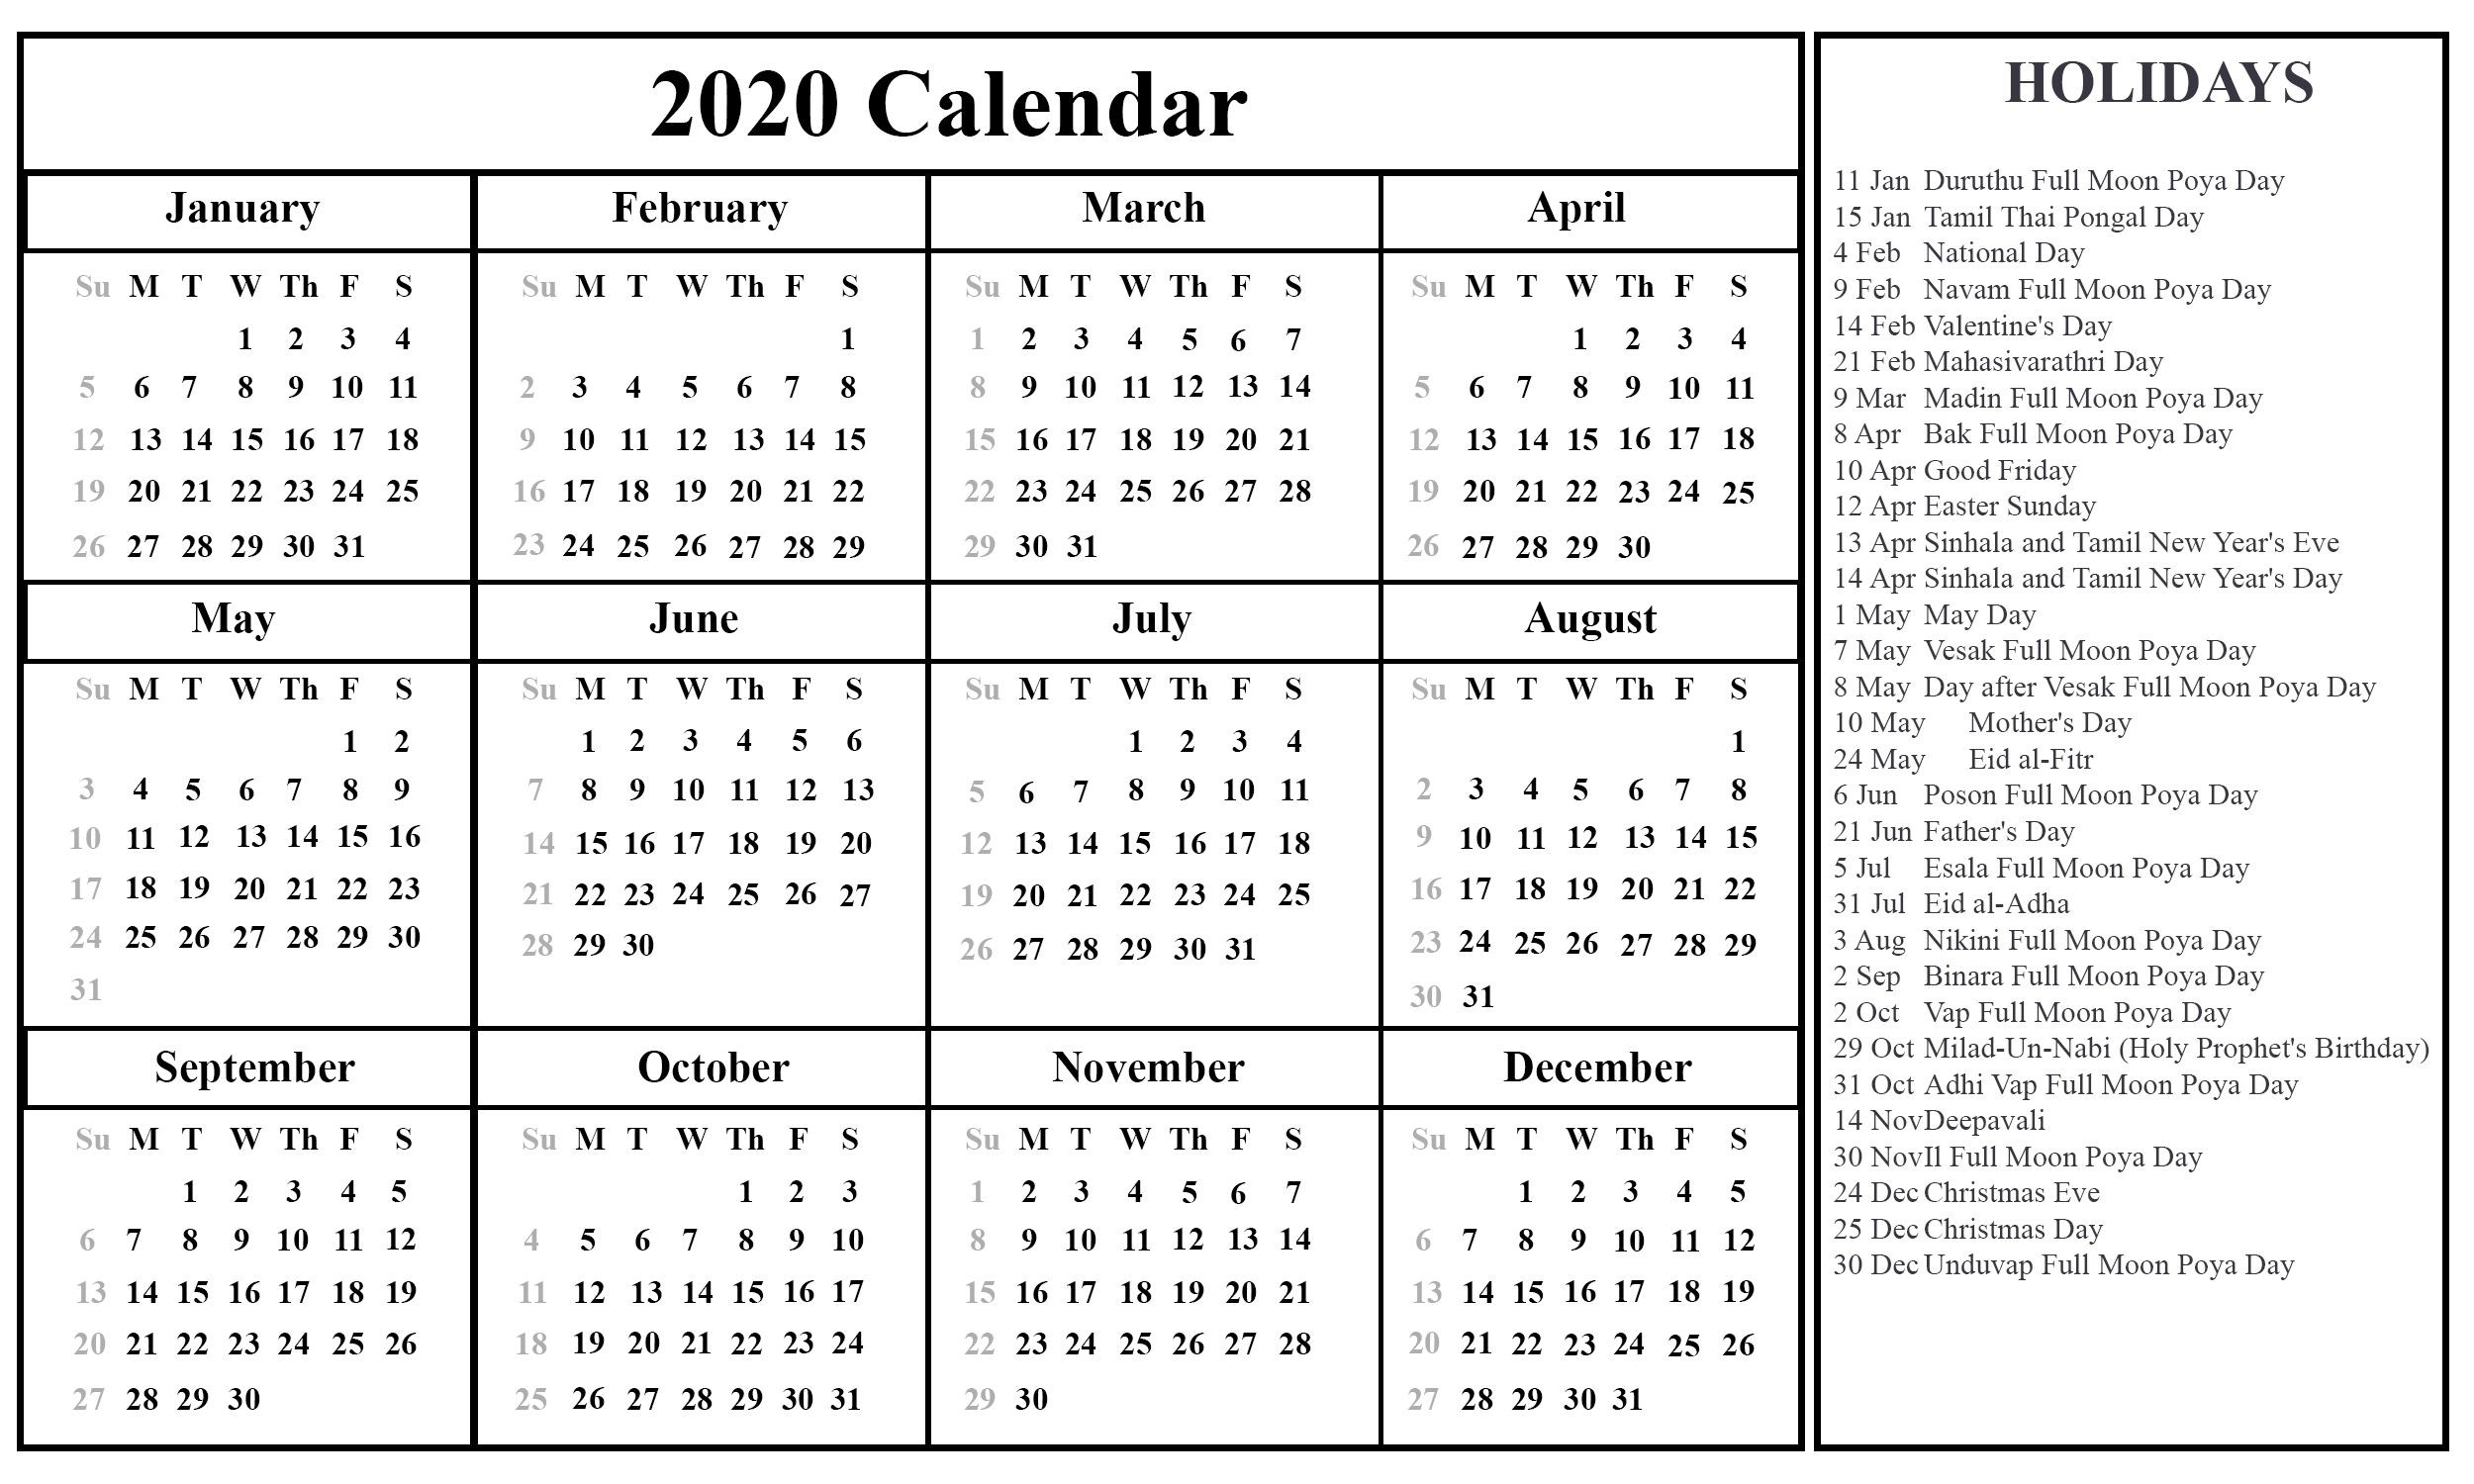 20+ Downloadable Free Printable 2021 Calendar With-Mercantile Holidays In Sri Lanka 2021